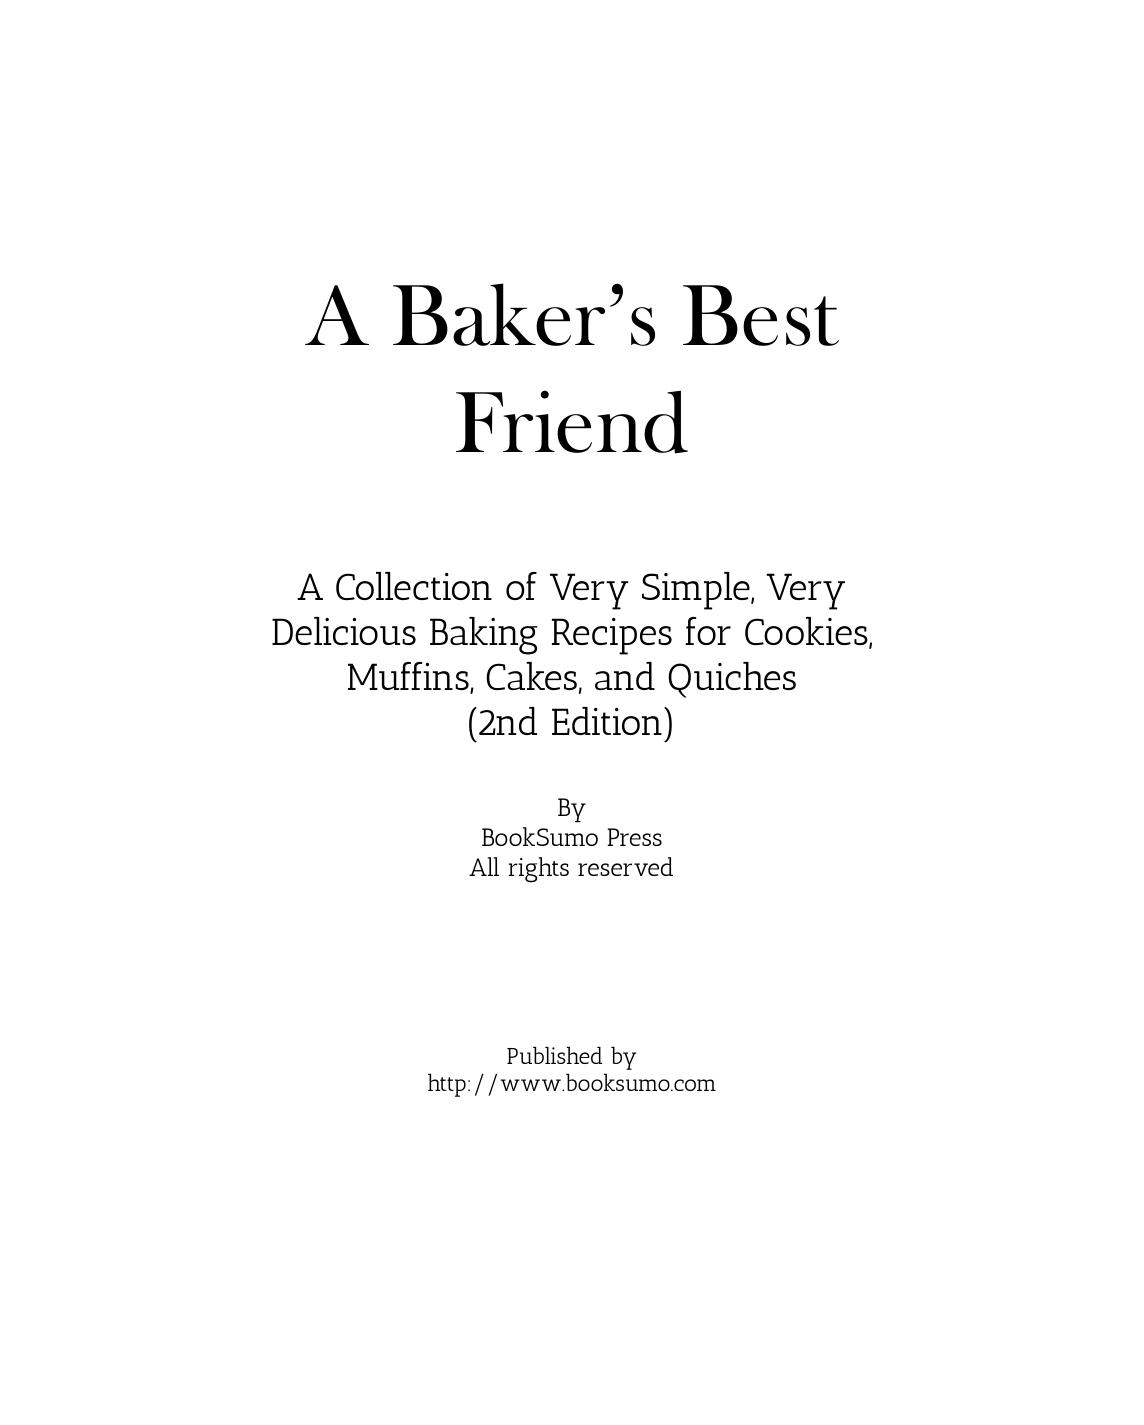 A Baker's Best Friend: An Easy Dessert Cookbook With Simple, Very Delicious Baking Recipes and Methods for Cookies, Muffins, Cakes, Quiches, and More by BookSumo Press